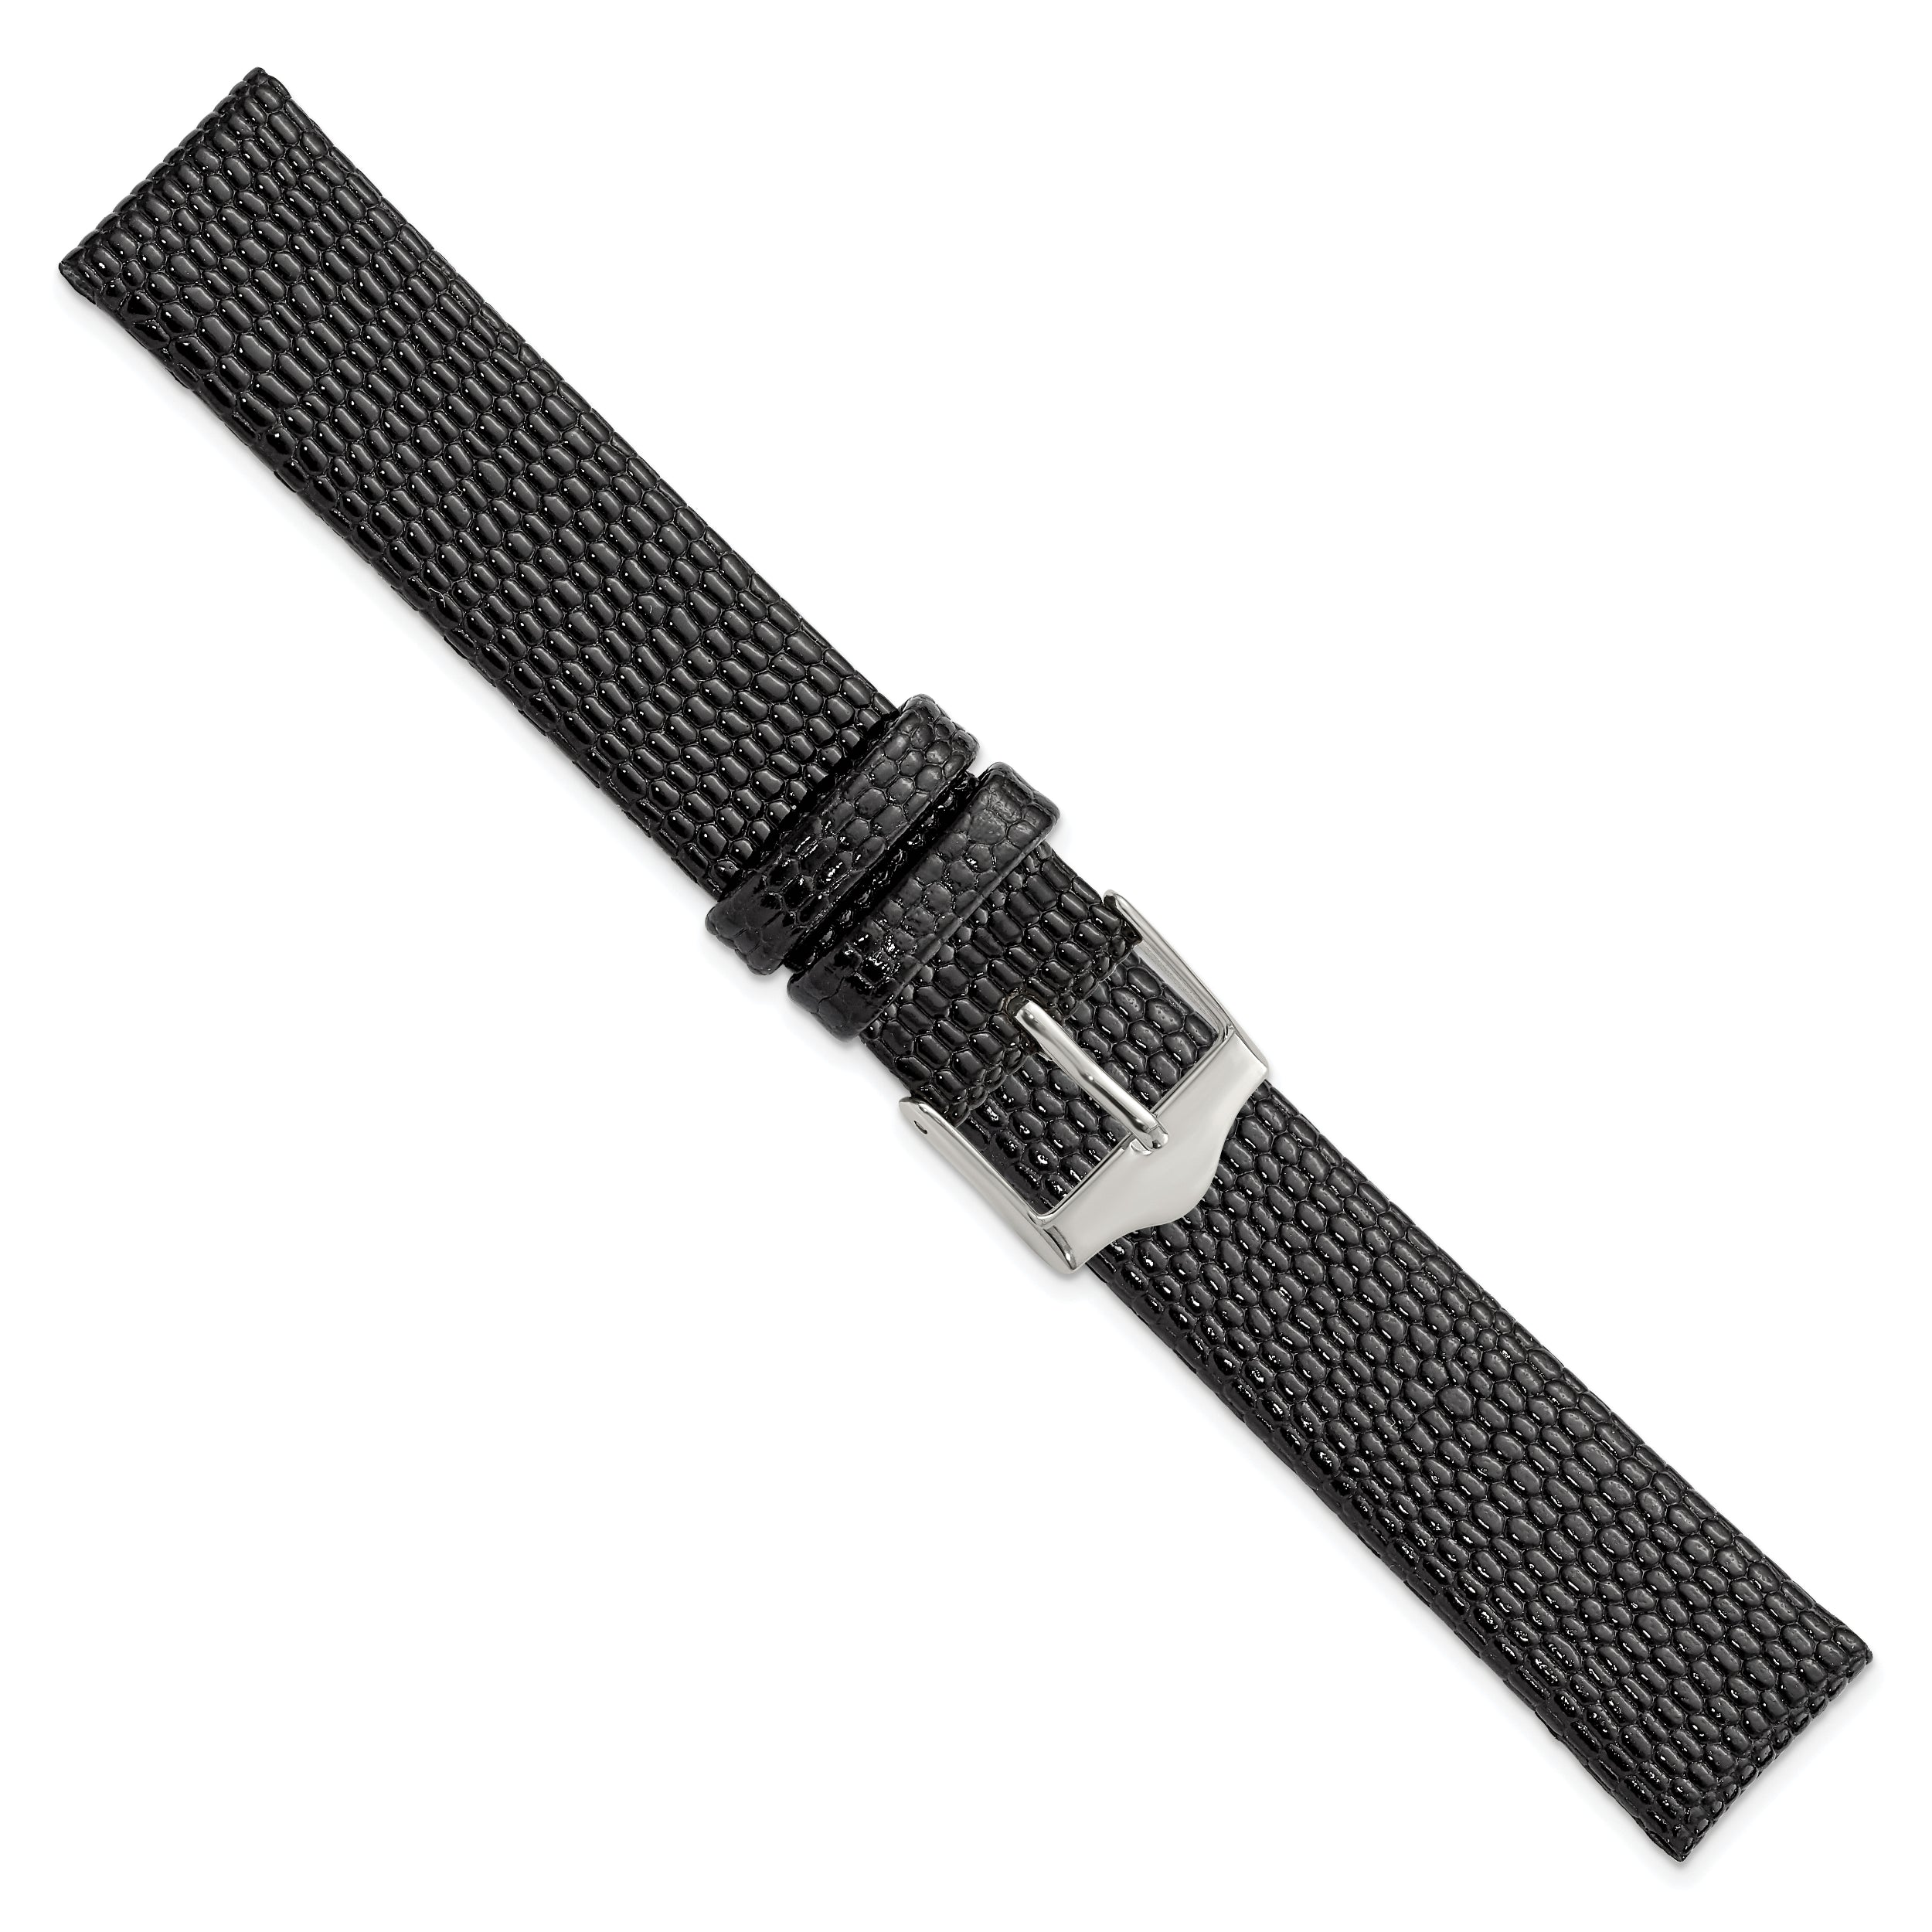 12mm Flat Black Lizard Grain Leather with Silver-tone Buckle 6.75 inch Watch Band